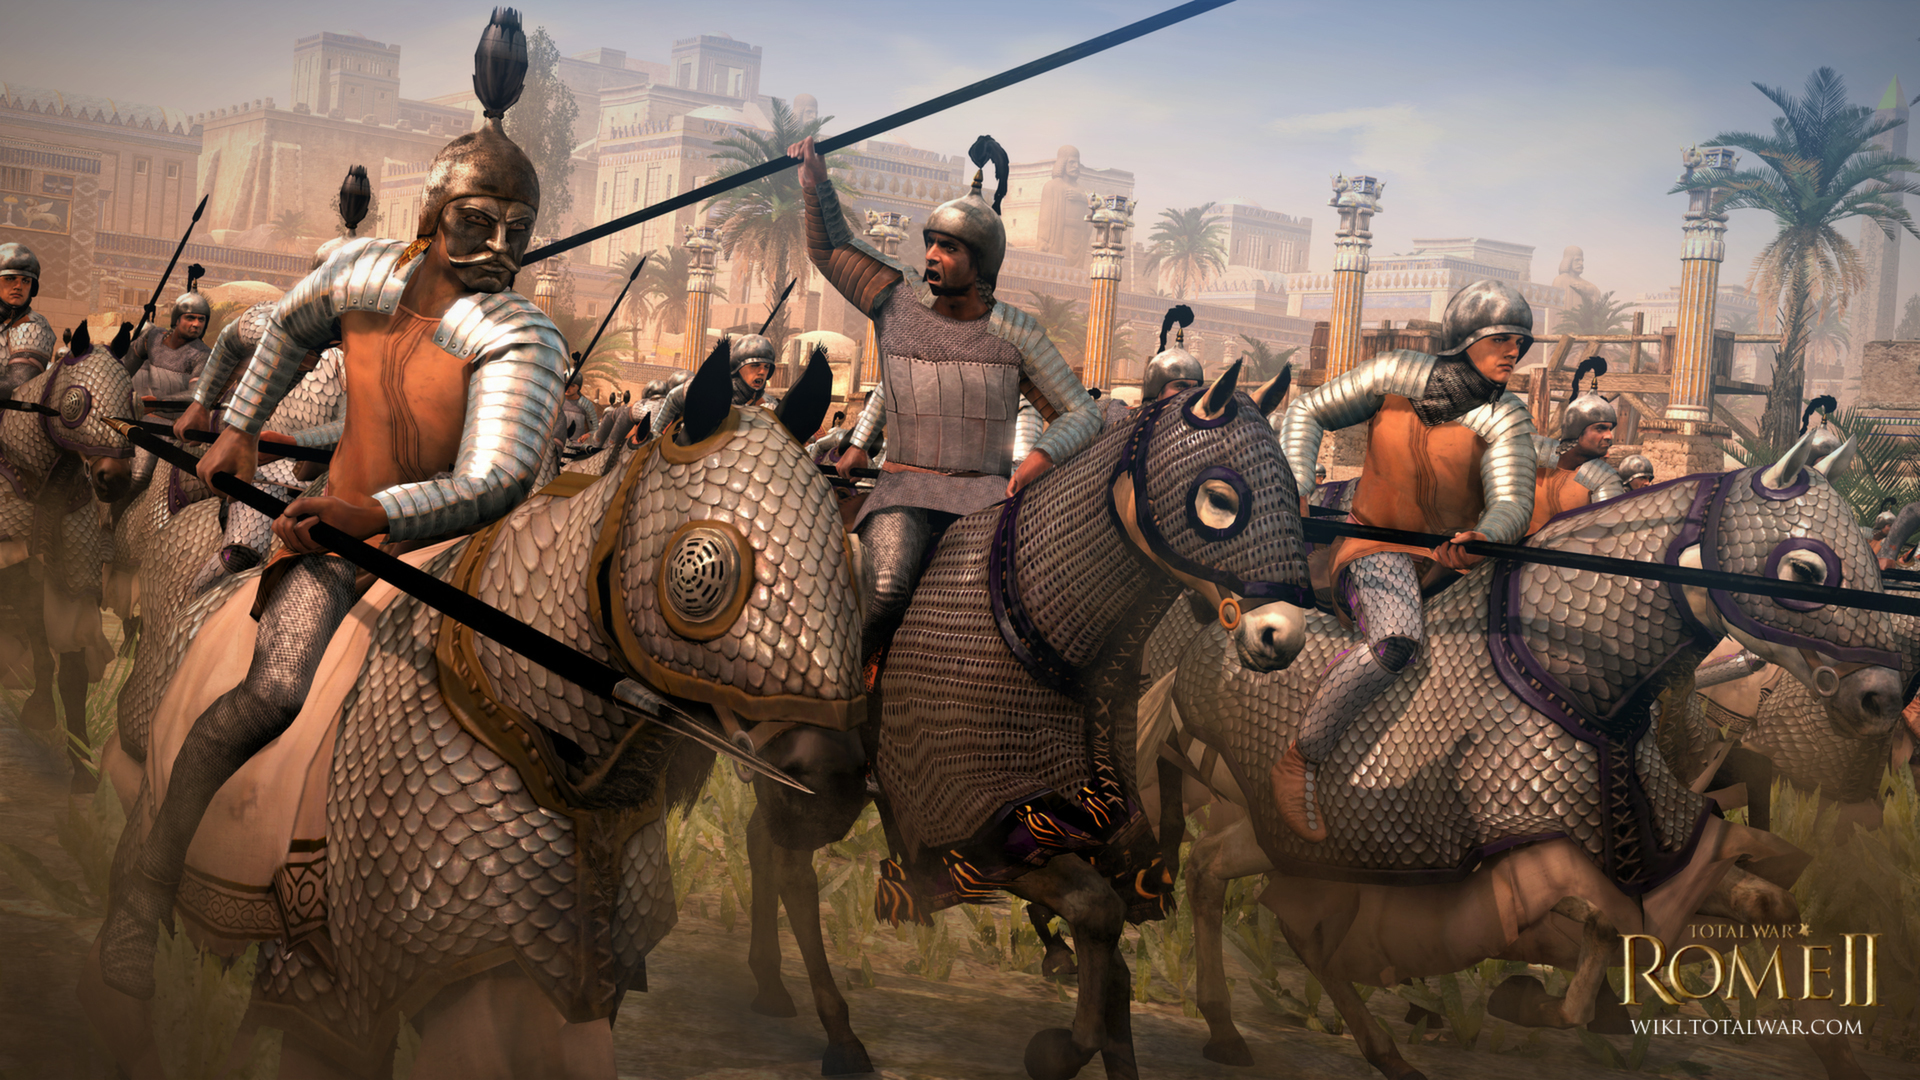 Total War™: ROME II - Emperor Edition on Steam